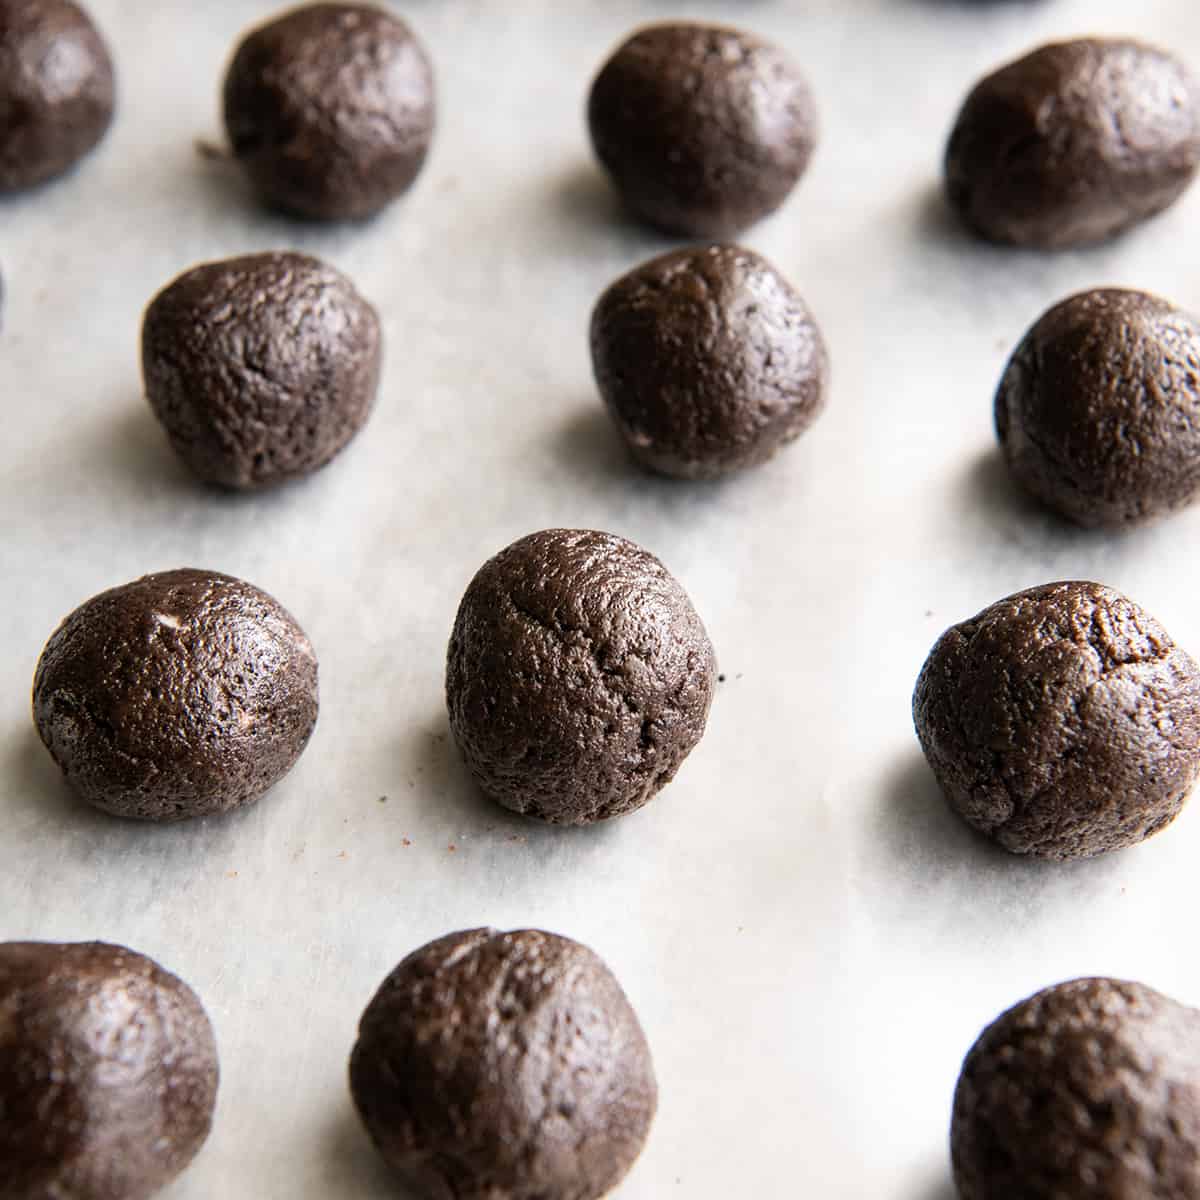 How to Make Oreo Balls - rolled balls on a baking sheet to freeze